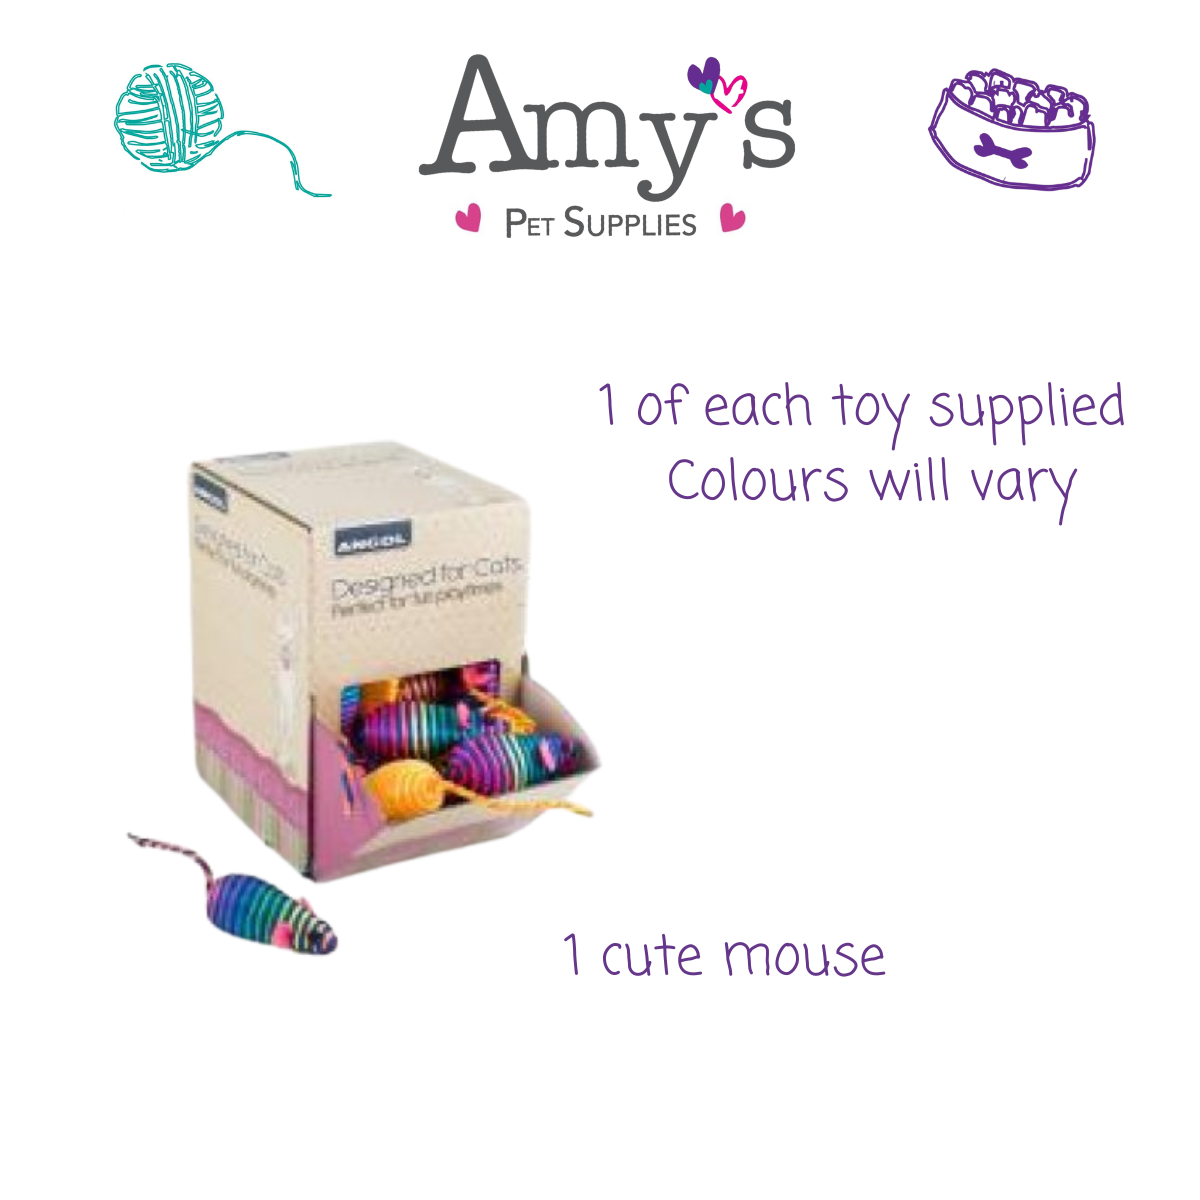 Cat Toy Bundle - includes our bestselling yeowww catnip toy!